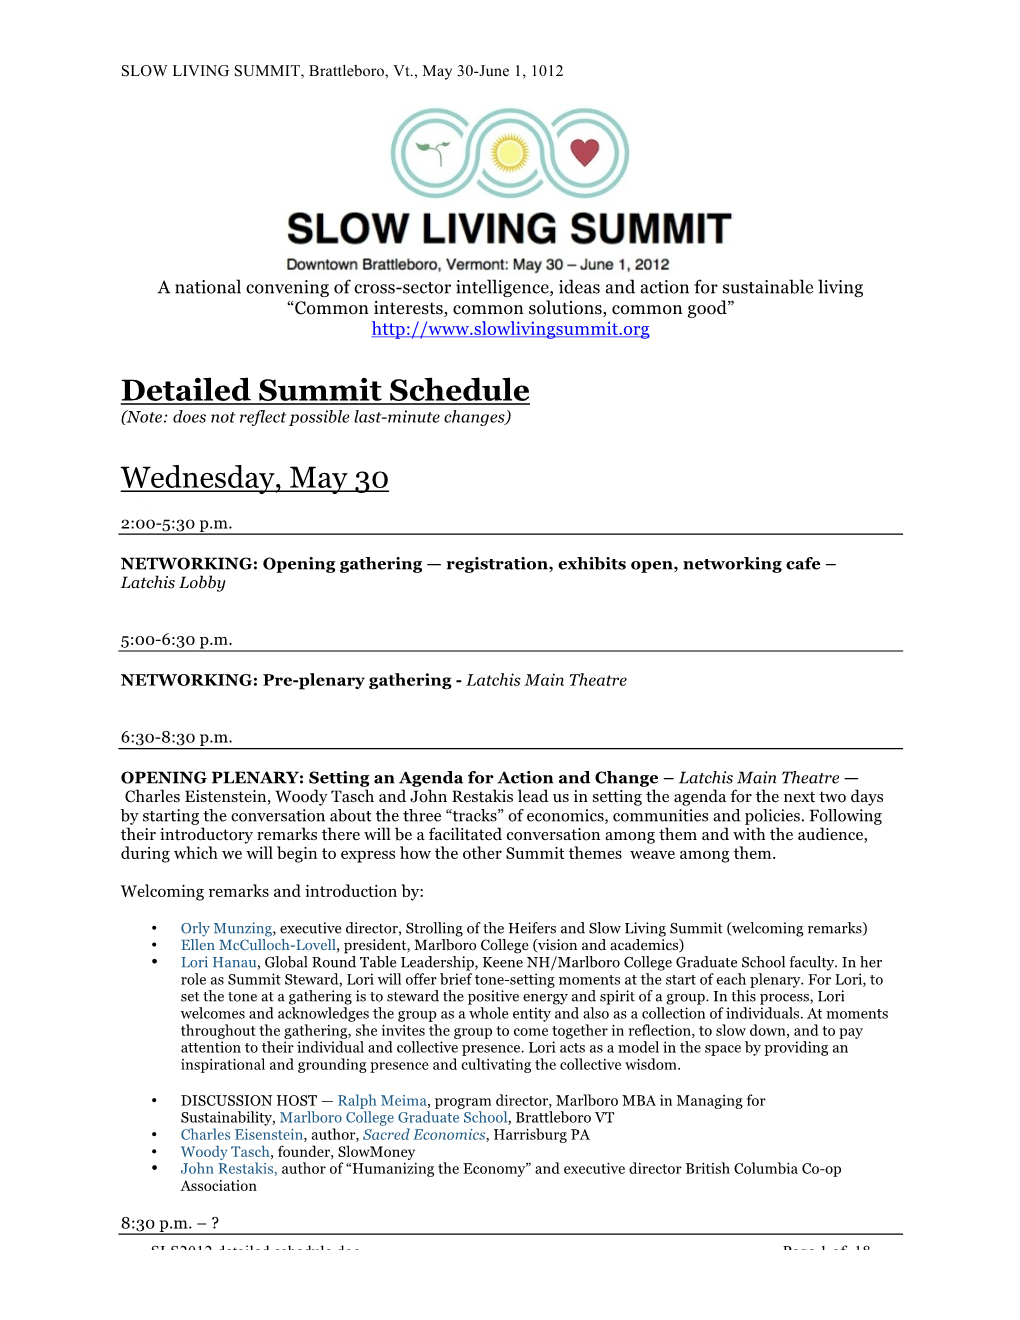 Detailed Summit Schedule Fef Wednesday, May 30